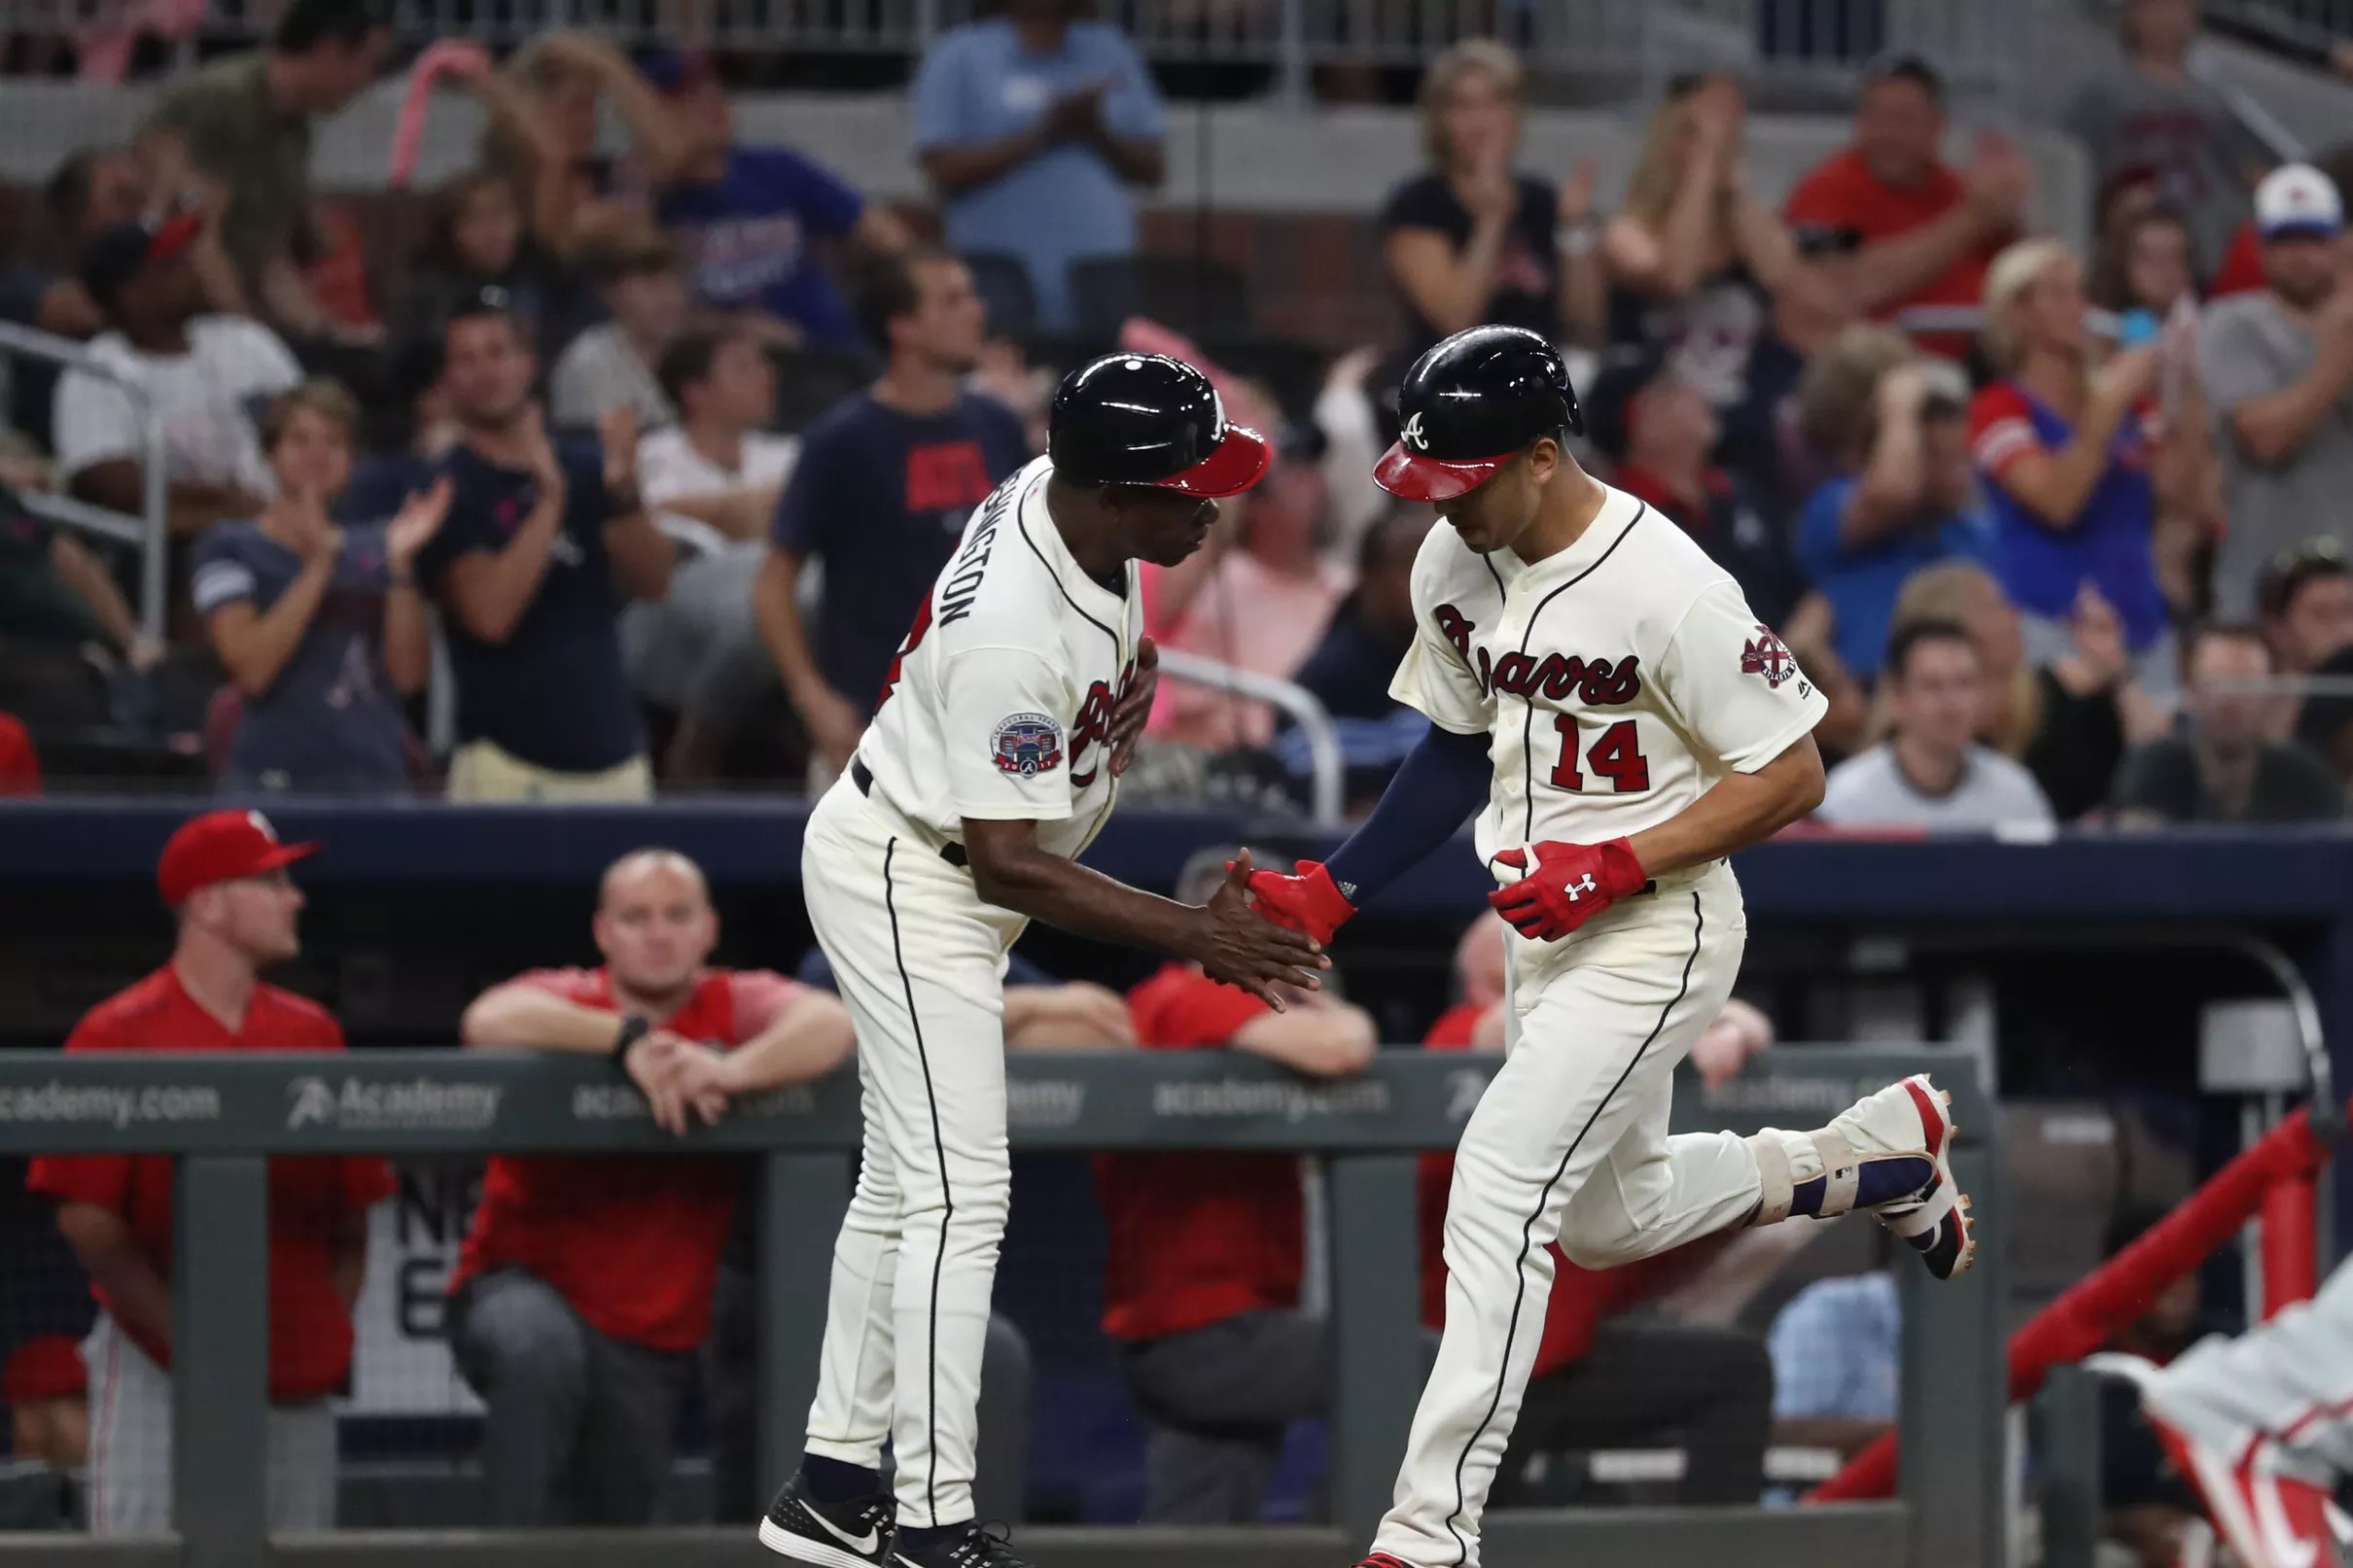 Braves great pitching leads to comeback win.